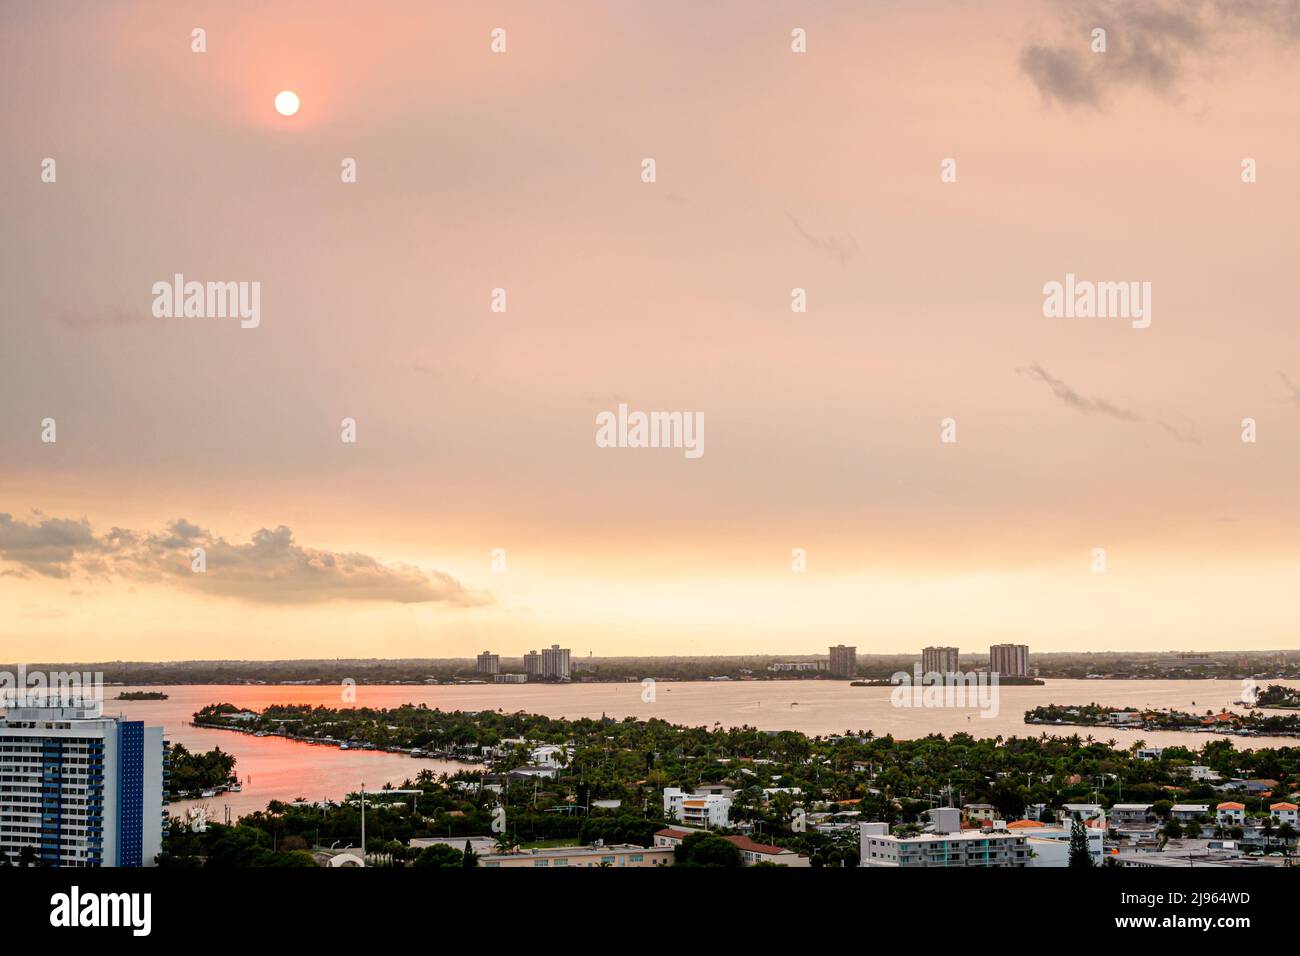 Miami Beach Florida,Biscayne Point Bay water smoke from Everglades fire,global warming climate crisis change sun sky Stock Photo